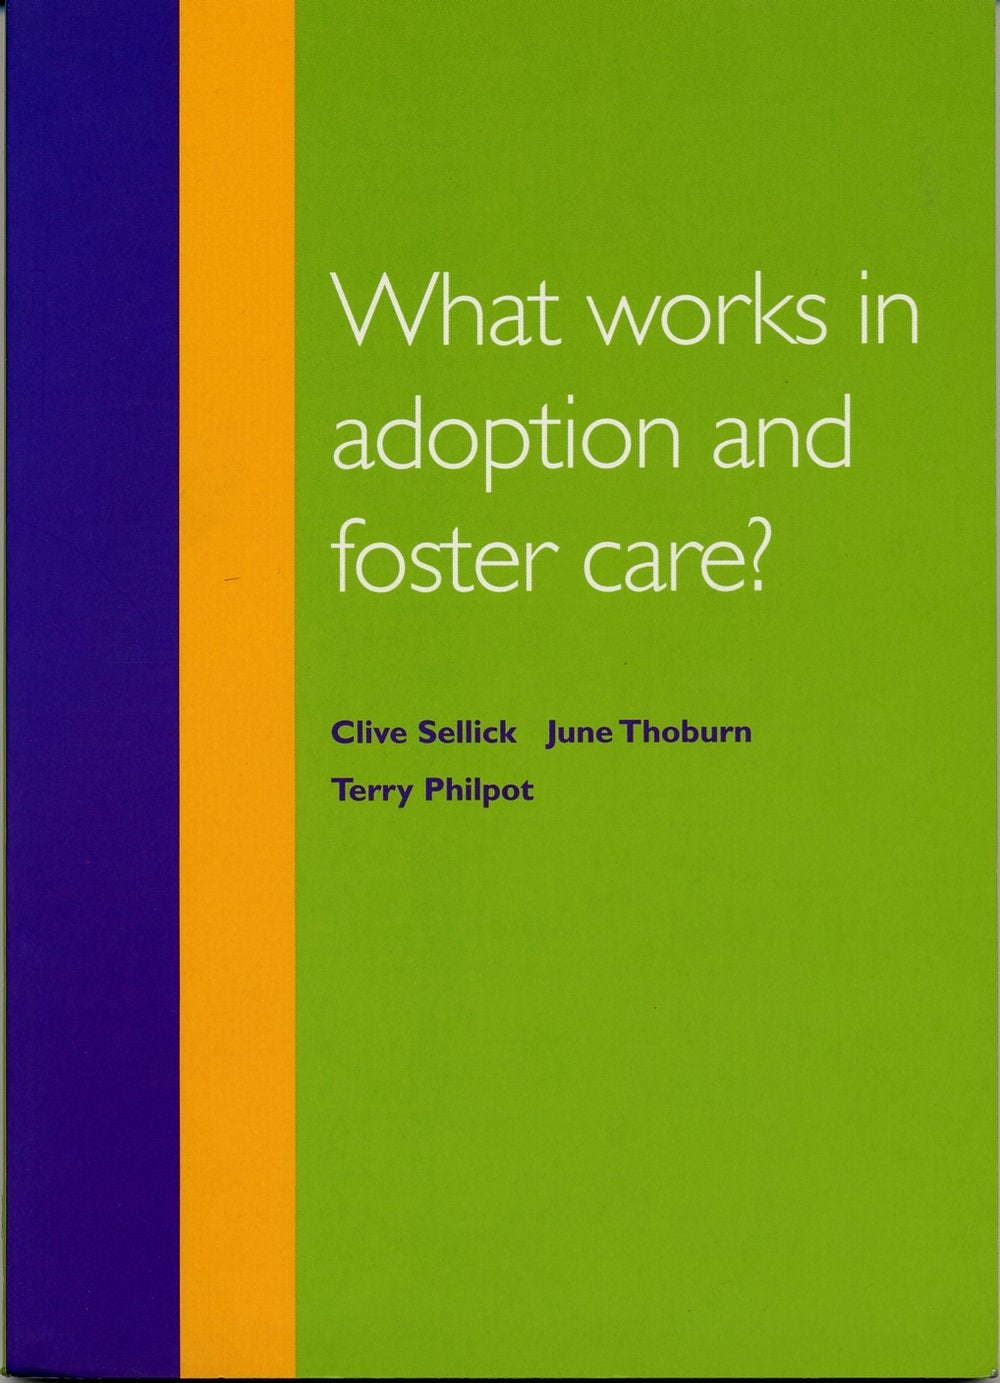 What Works in Adoption and Foster Care? by June Thoburn